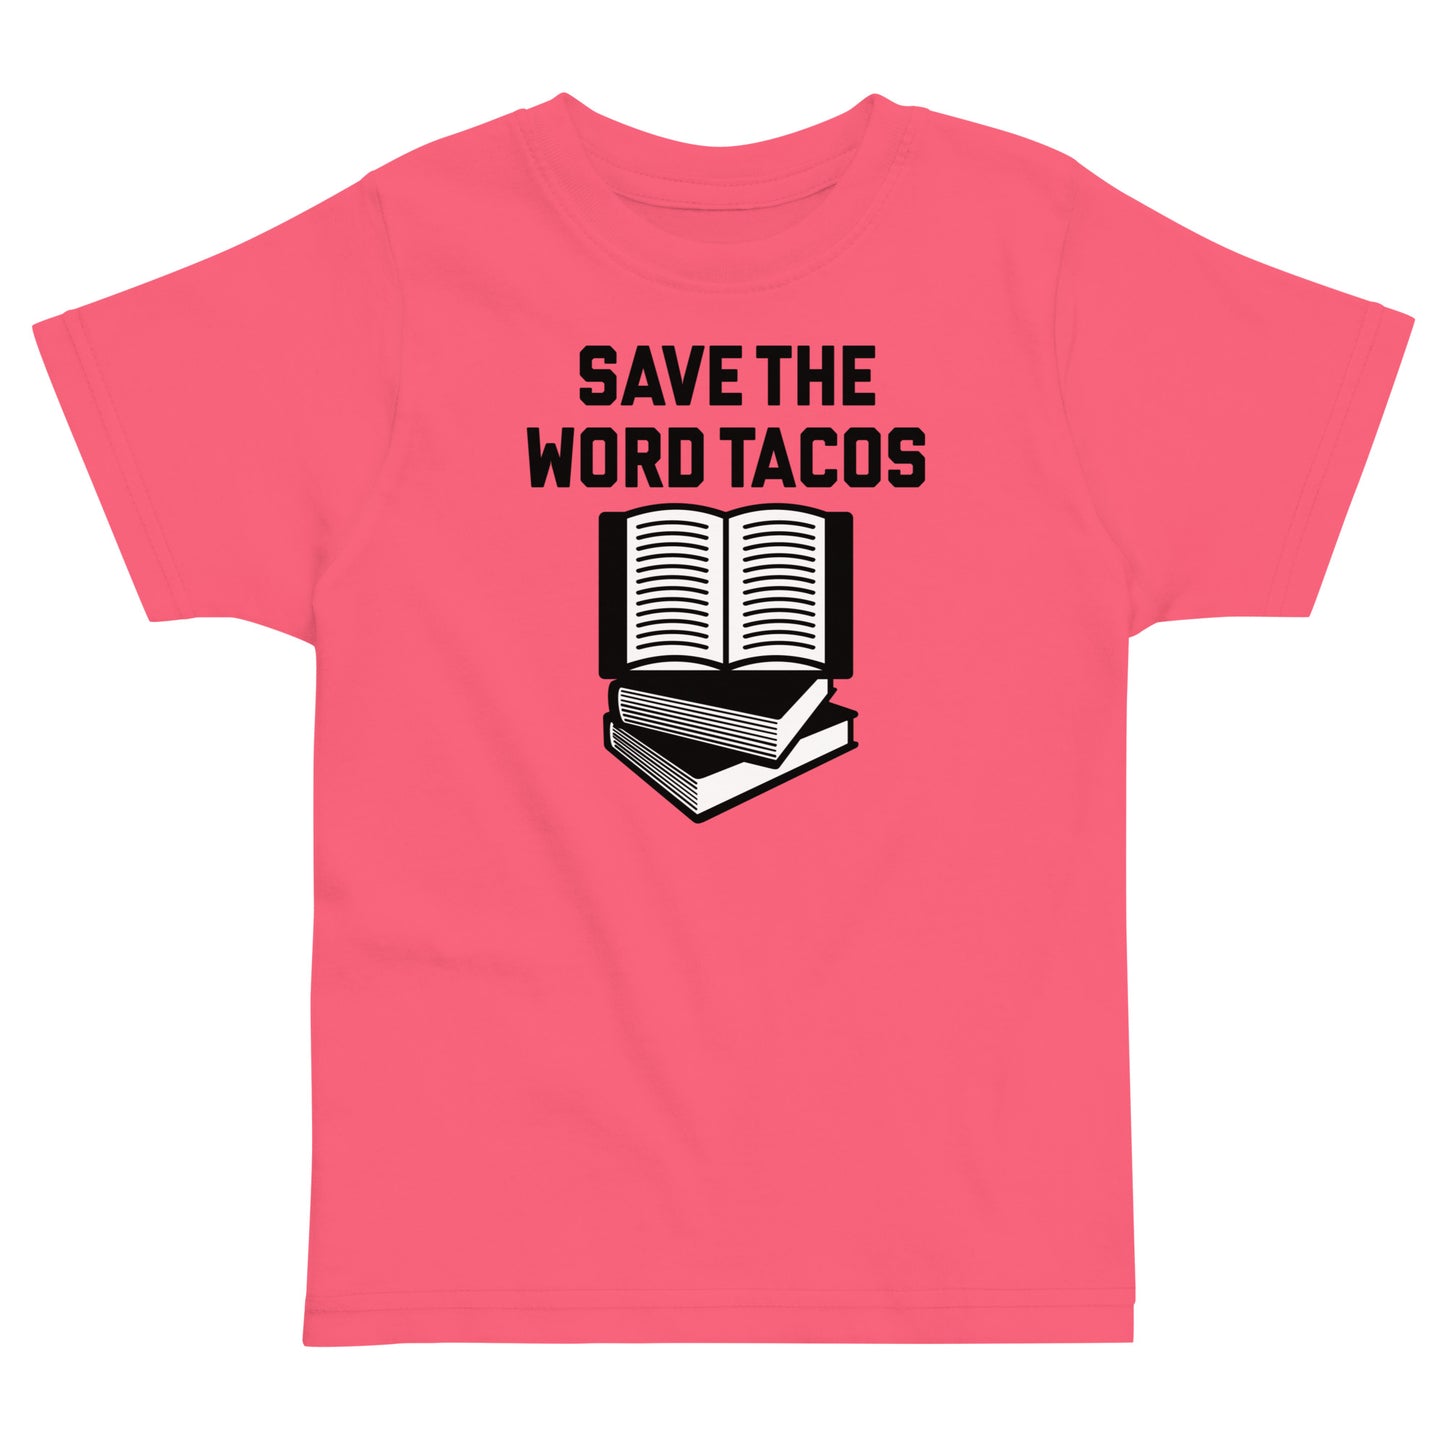 Save The Word Tacos Kid's Toddler Tee